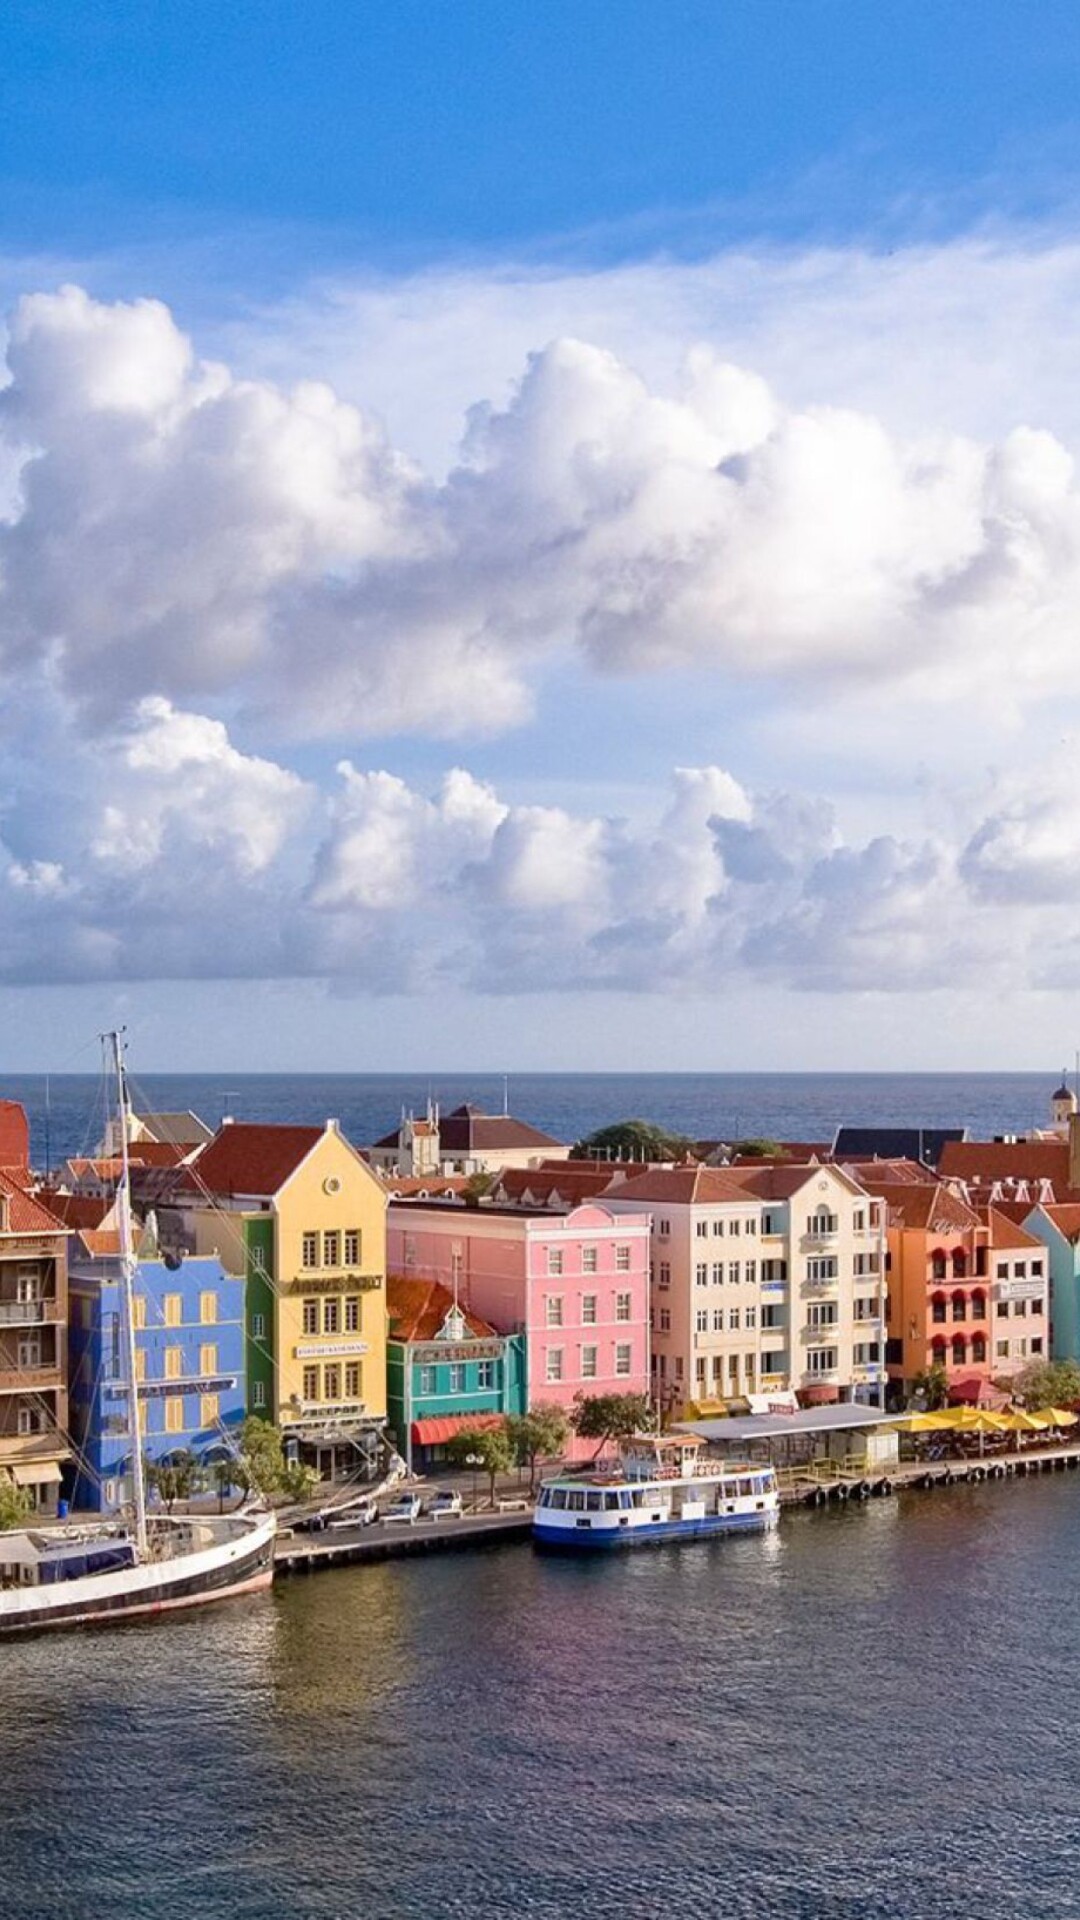 Netherlands: Curacao, A Lesser Antilles island country in the southern Caribbean Sea. 1080x1920 Full HD Wallpaper.